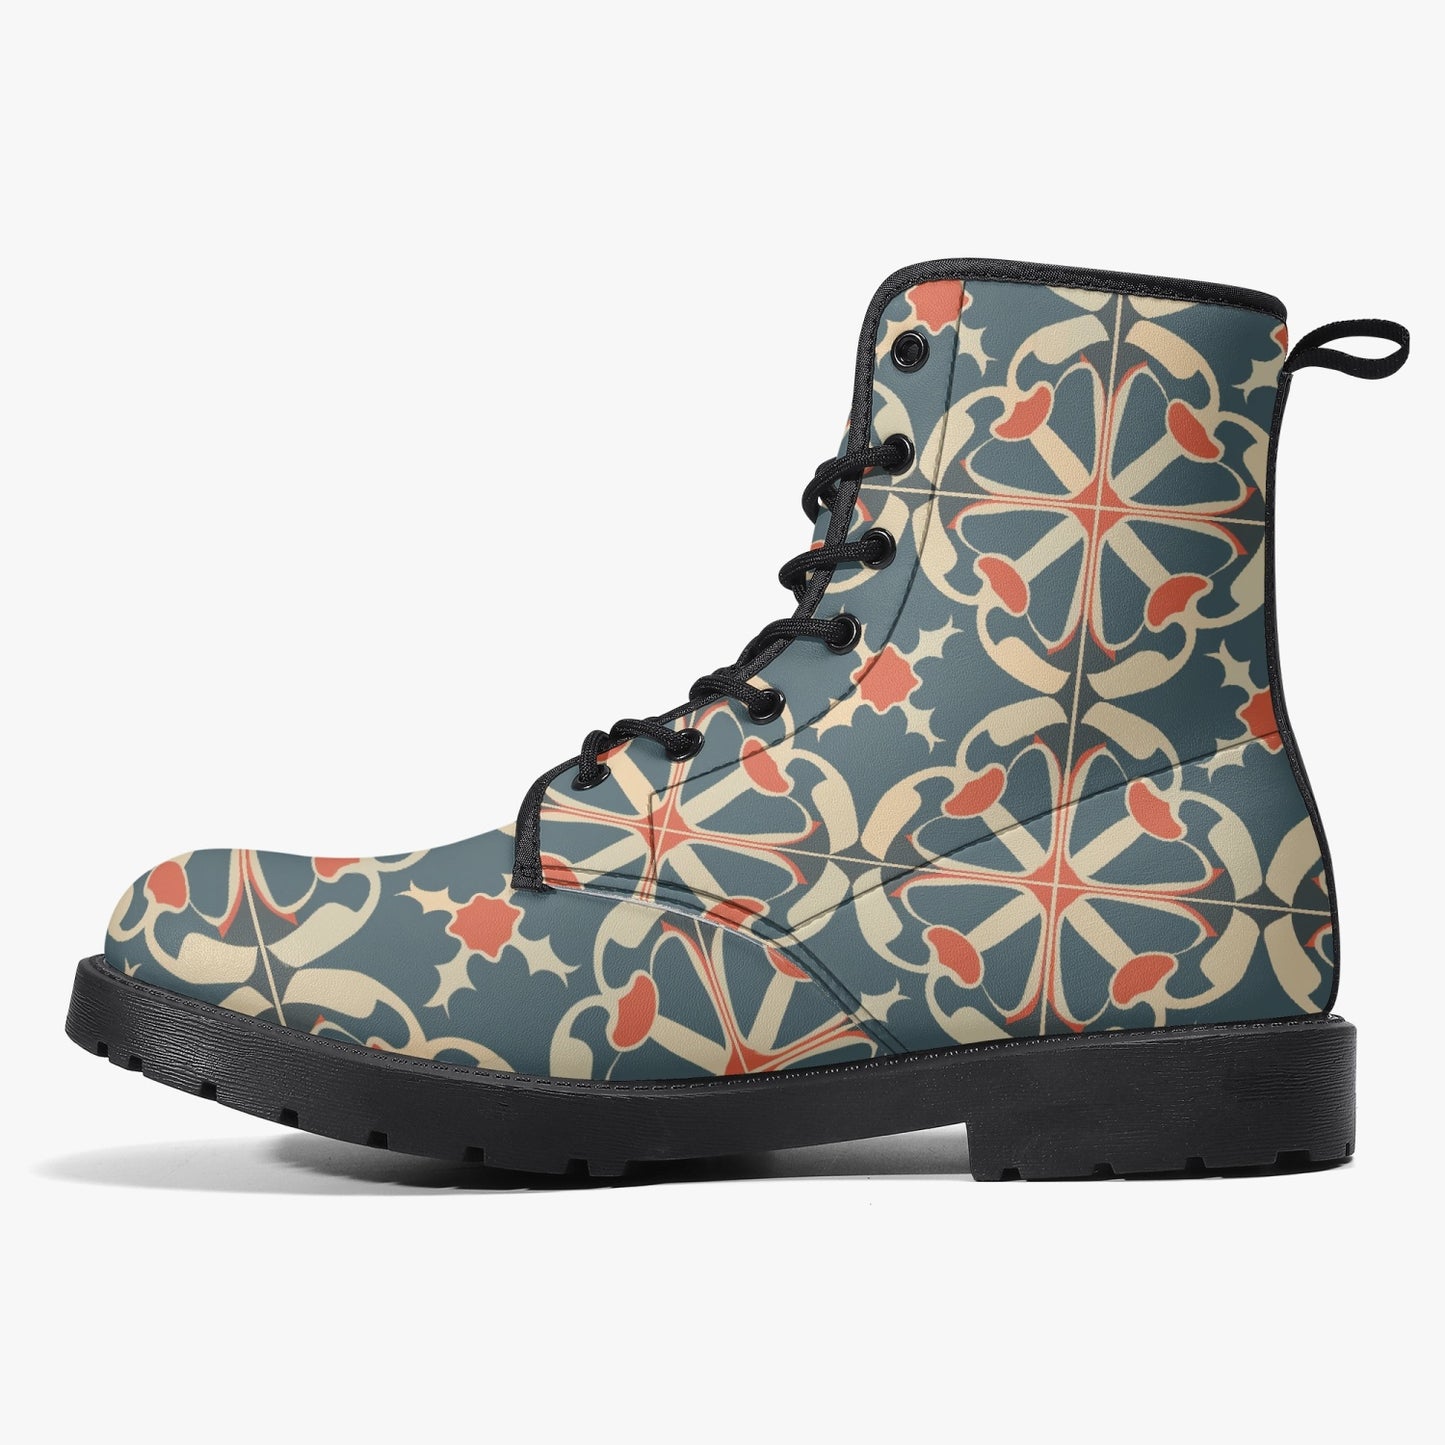 Inspired by Minton Leather Boots